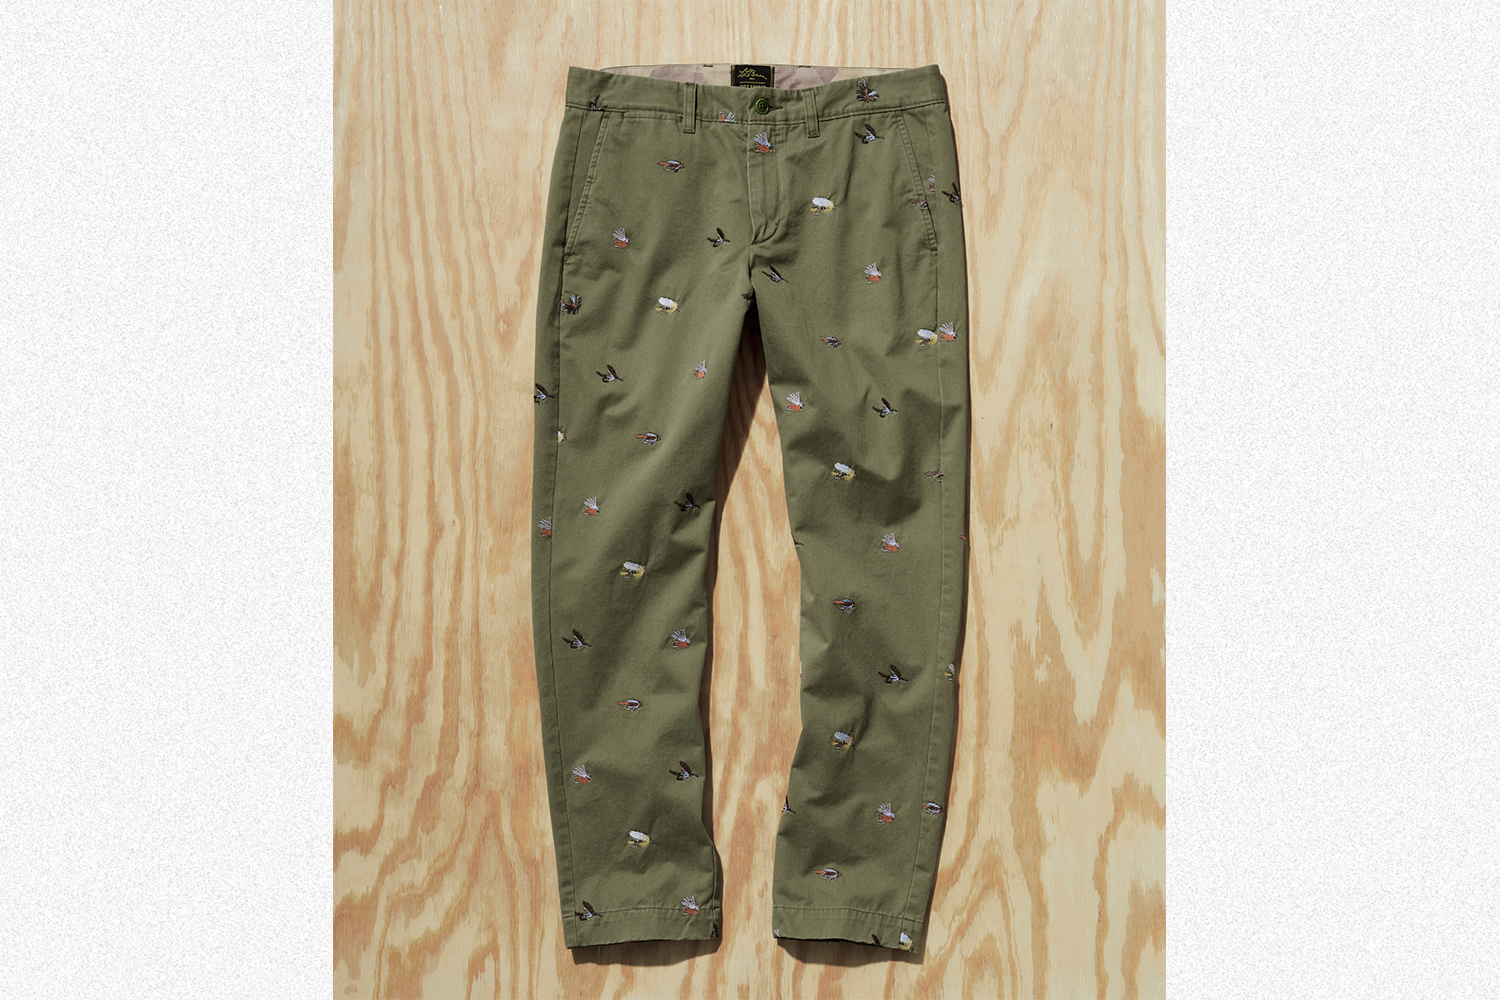 Todd Snyder x L.L.Bean Embroidered Pant in Sage